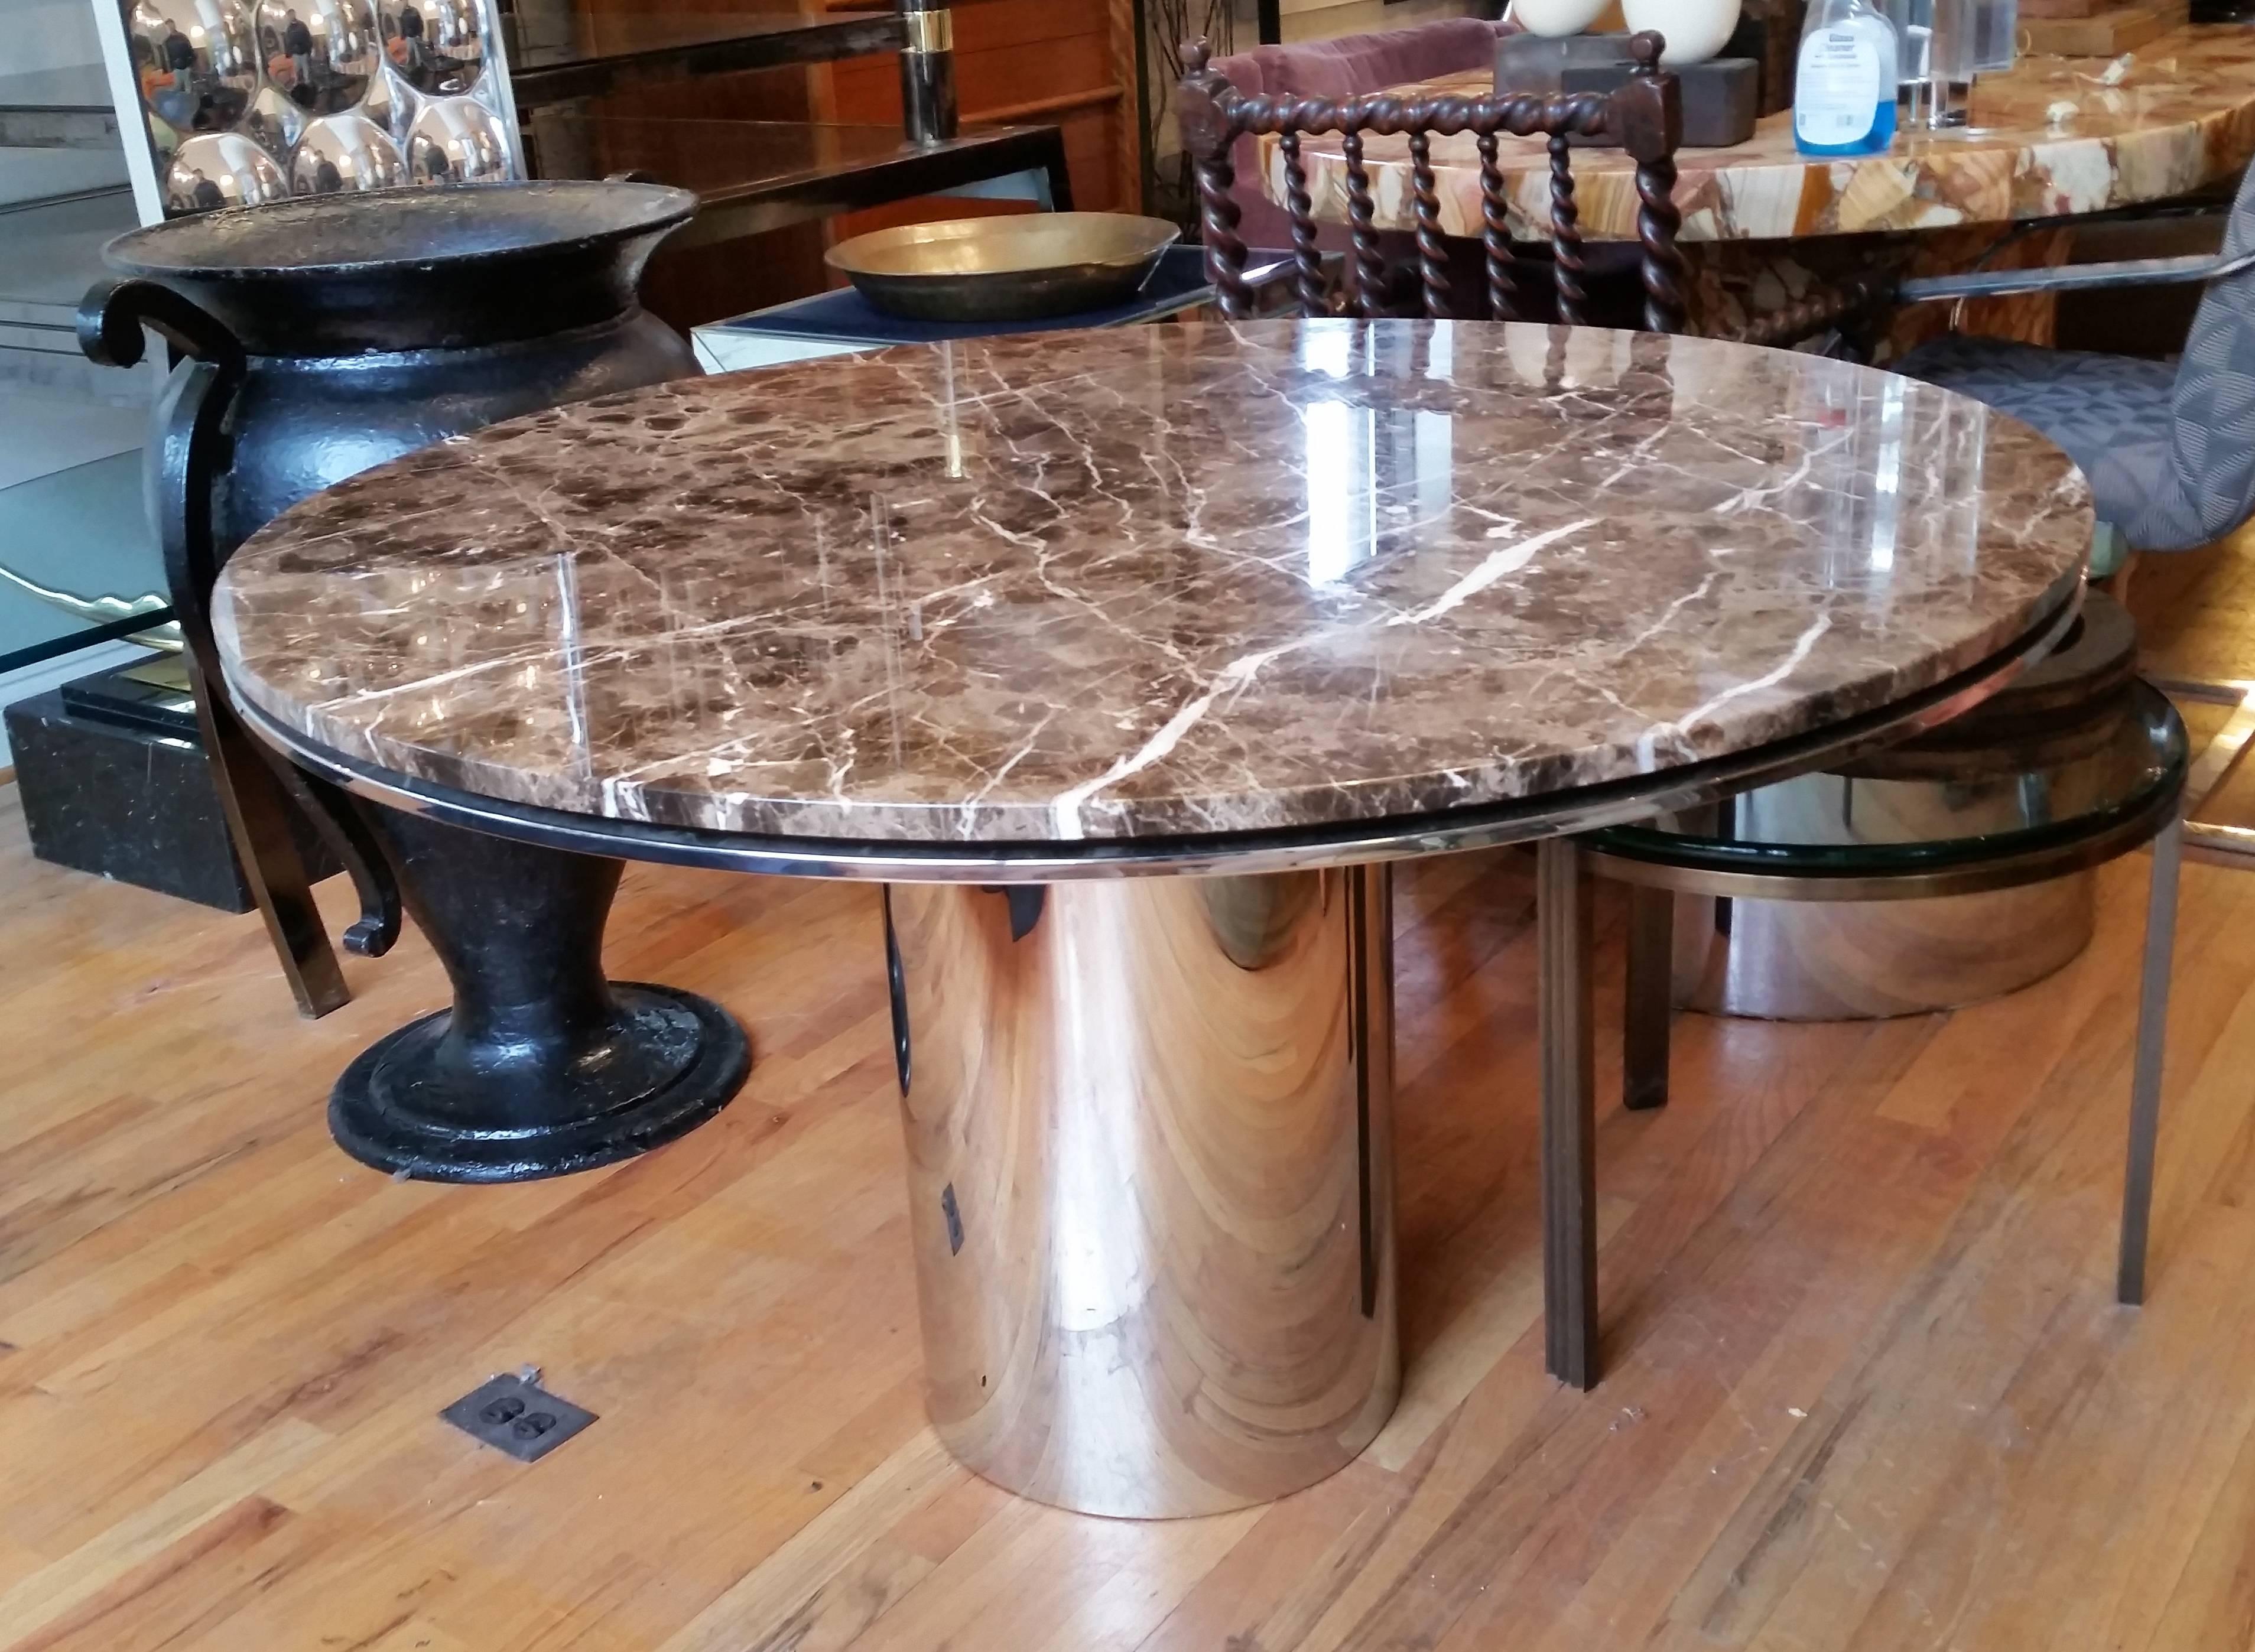 Brueton's Anello table in marble and chrome. 
The marble floats on a stainless steel top. The base is a seamless chromed stainless steel column. Outstanding quality. Excellent proportions. 
Would also make an elegant center table.